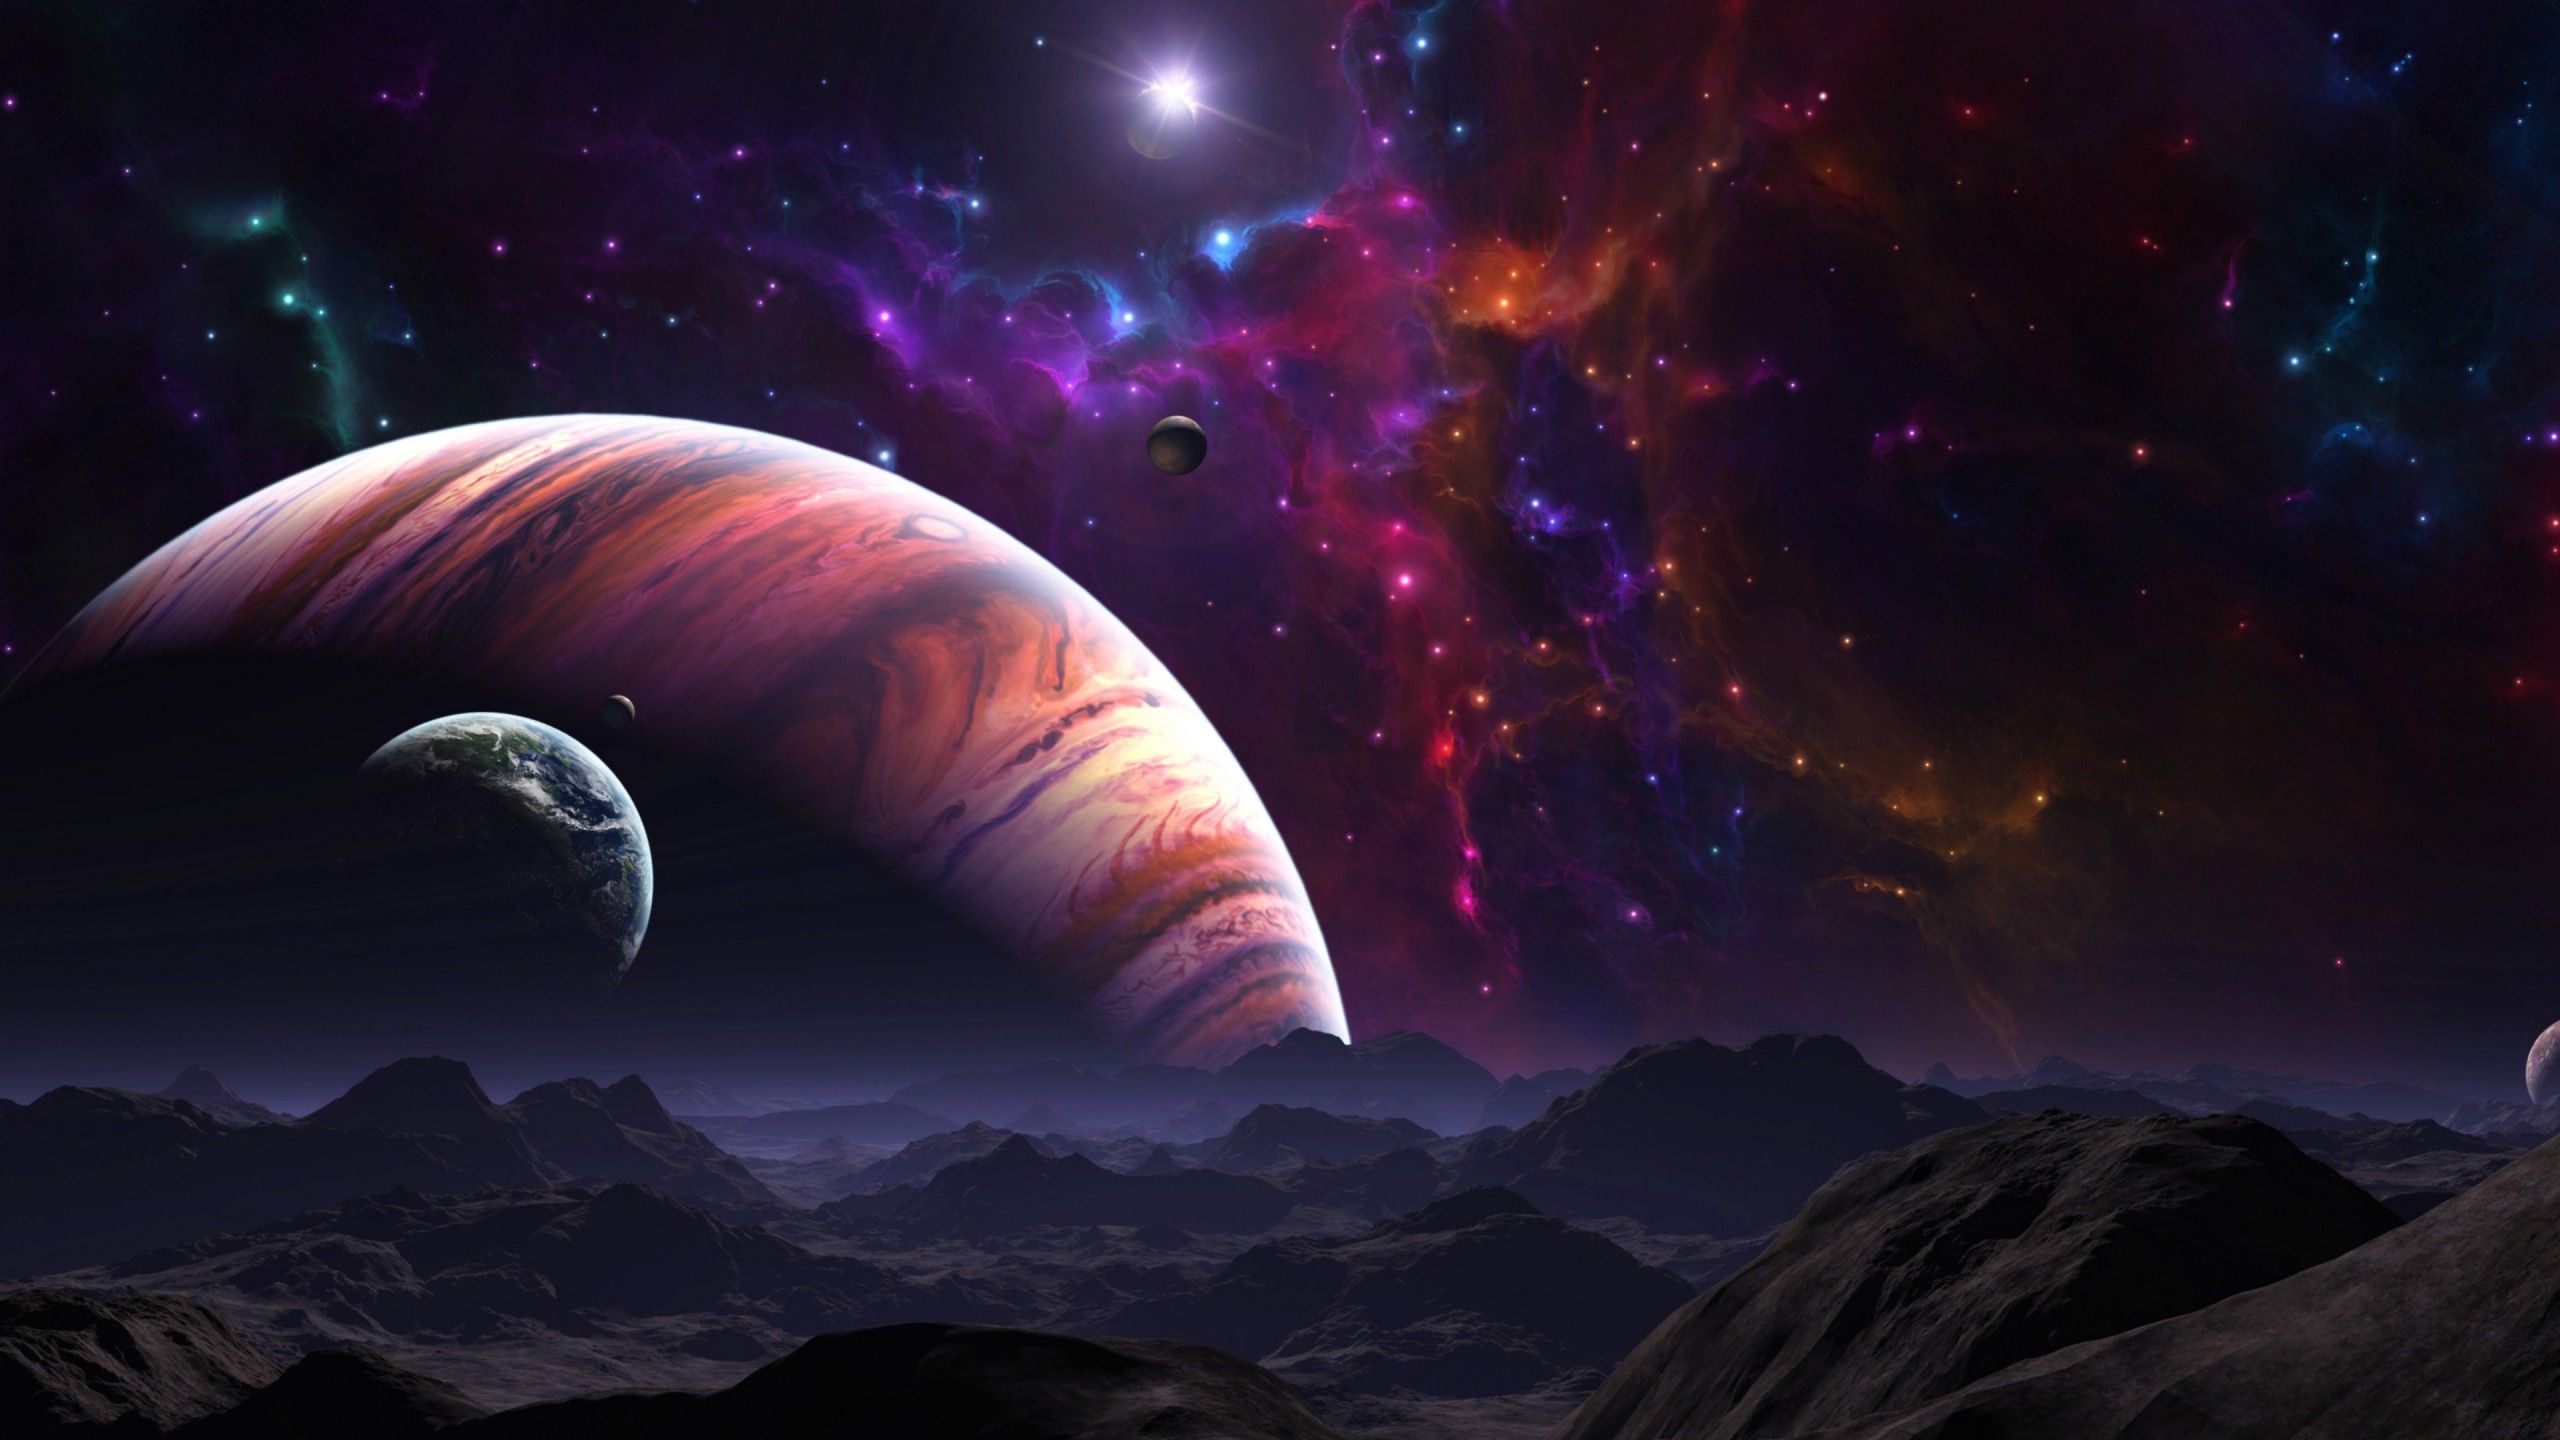 Planets 4K wallpaper for your desktop or mobile screen free and easy to download